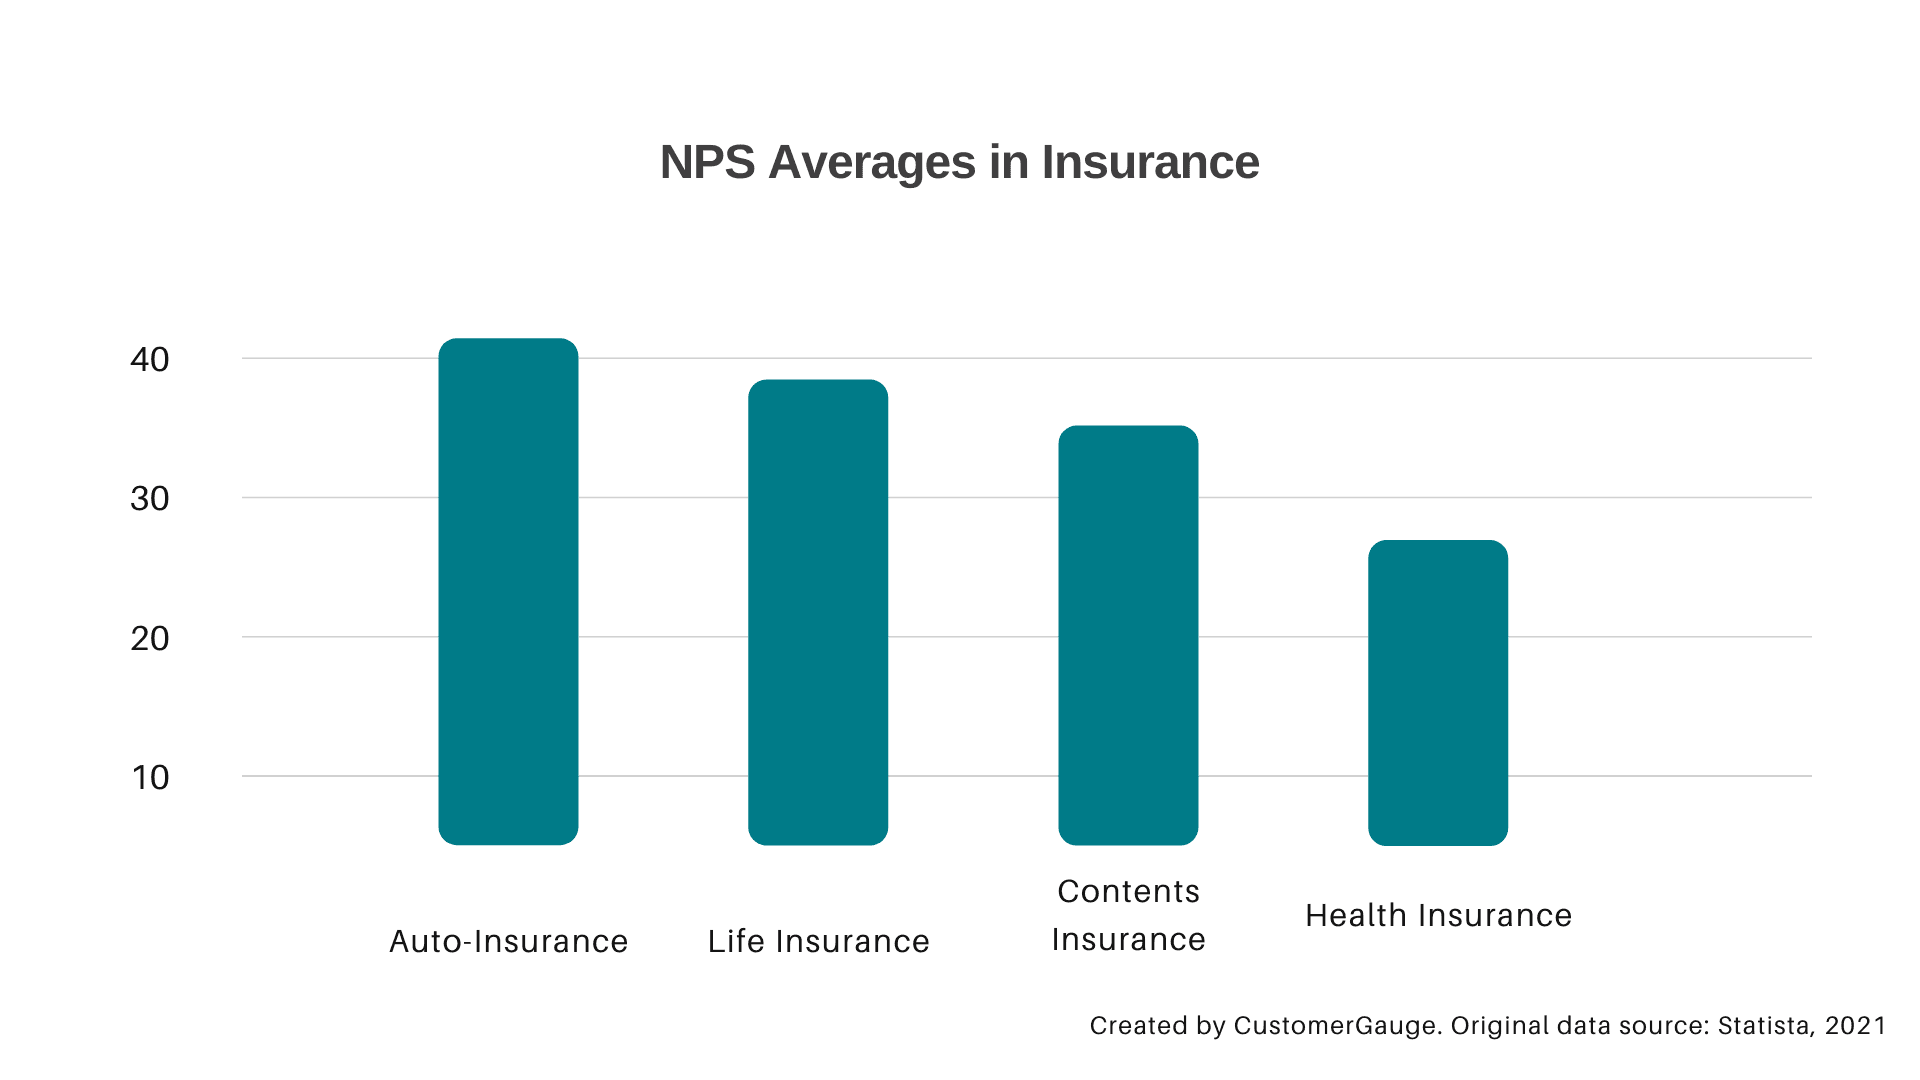 Statista NPS averages for the insurance industry